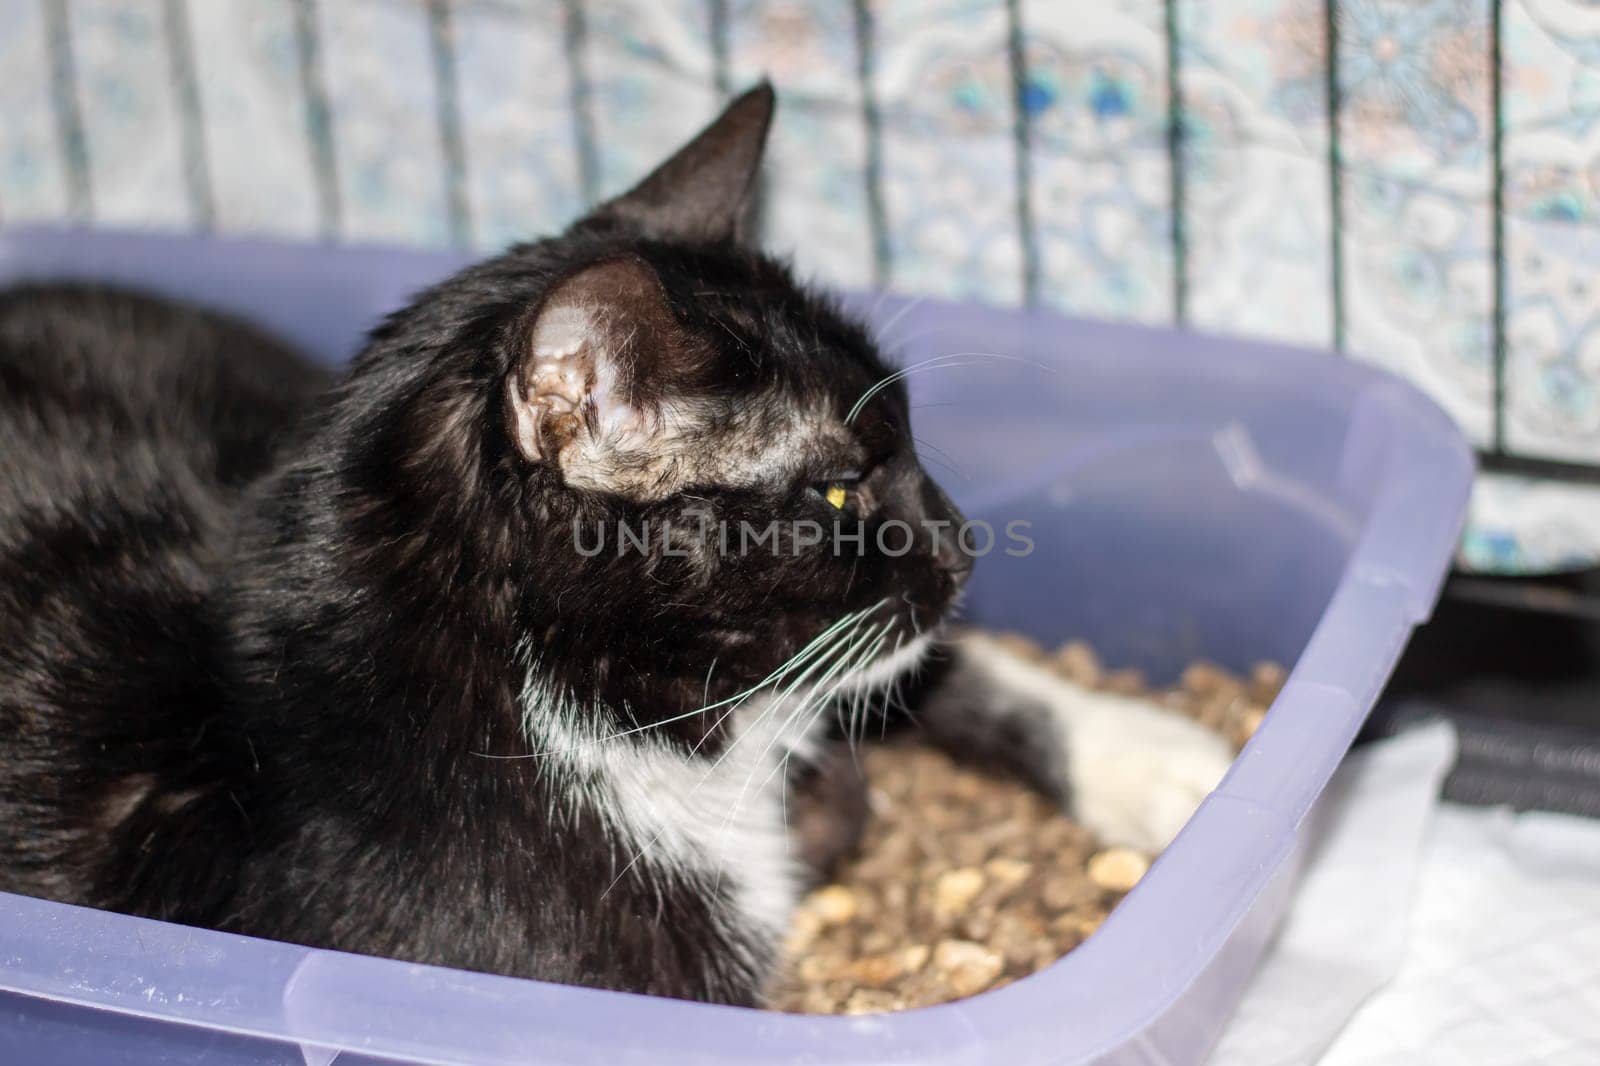 A small to mediumsized black and white Felidae cat is comfortably laying in a purple litter box, showcasing its whiskers and snout. The perfect pet supply for carnivorous cats